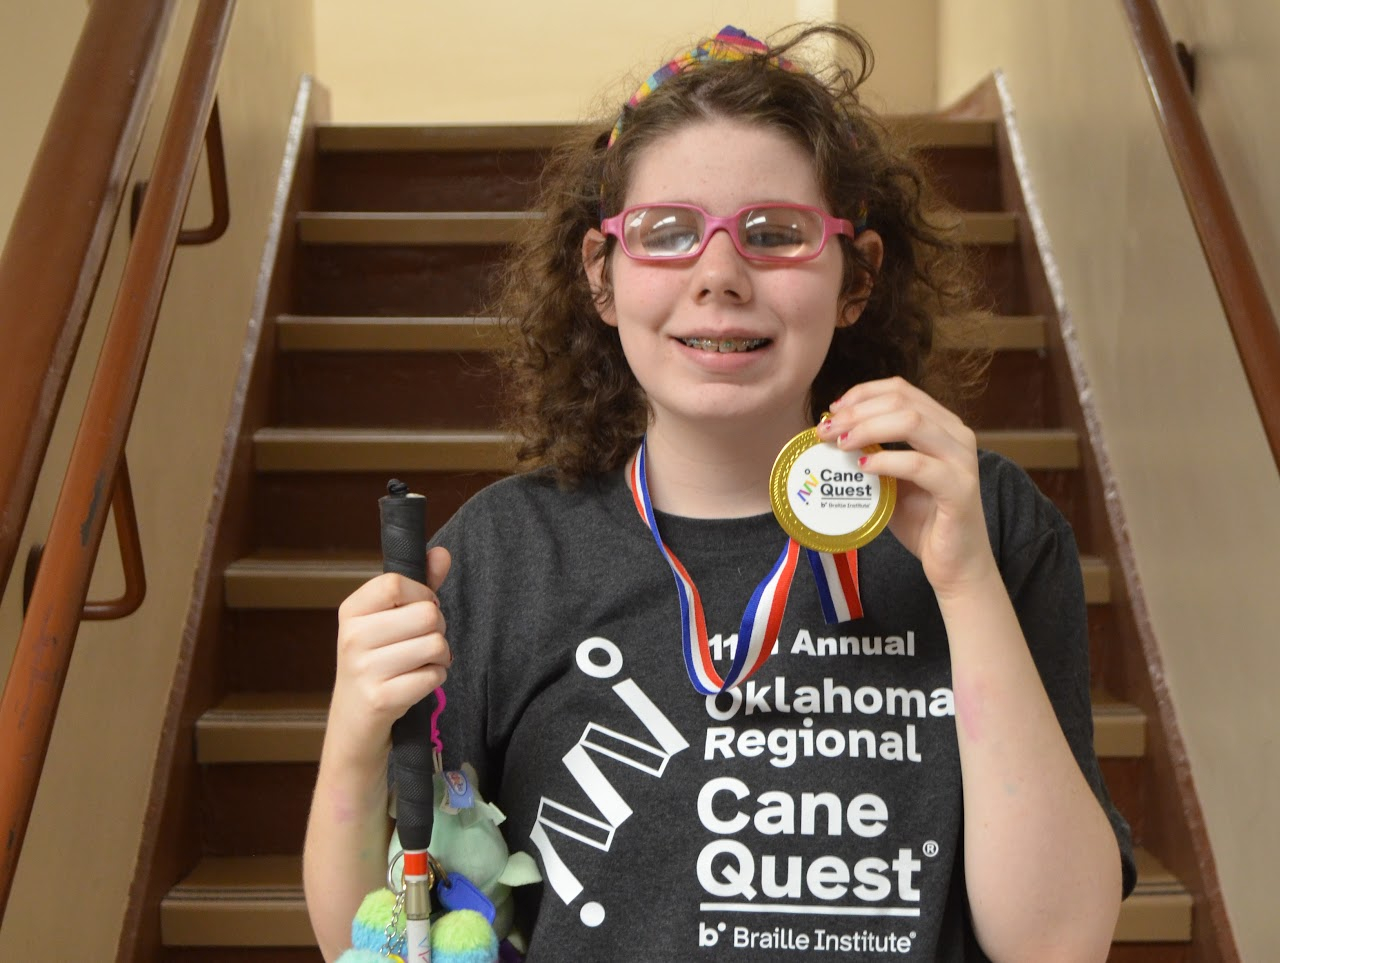 Student with cane and showing cane quest medal